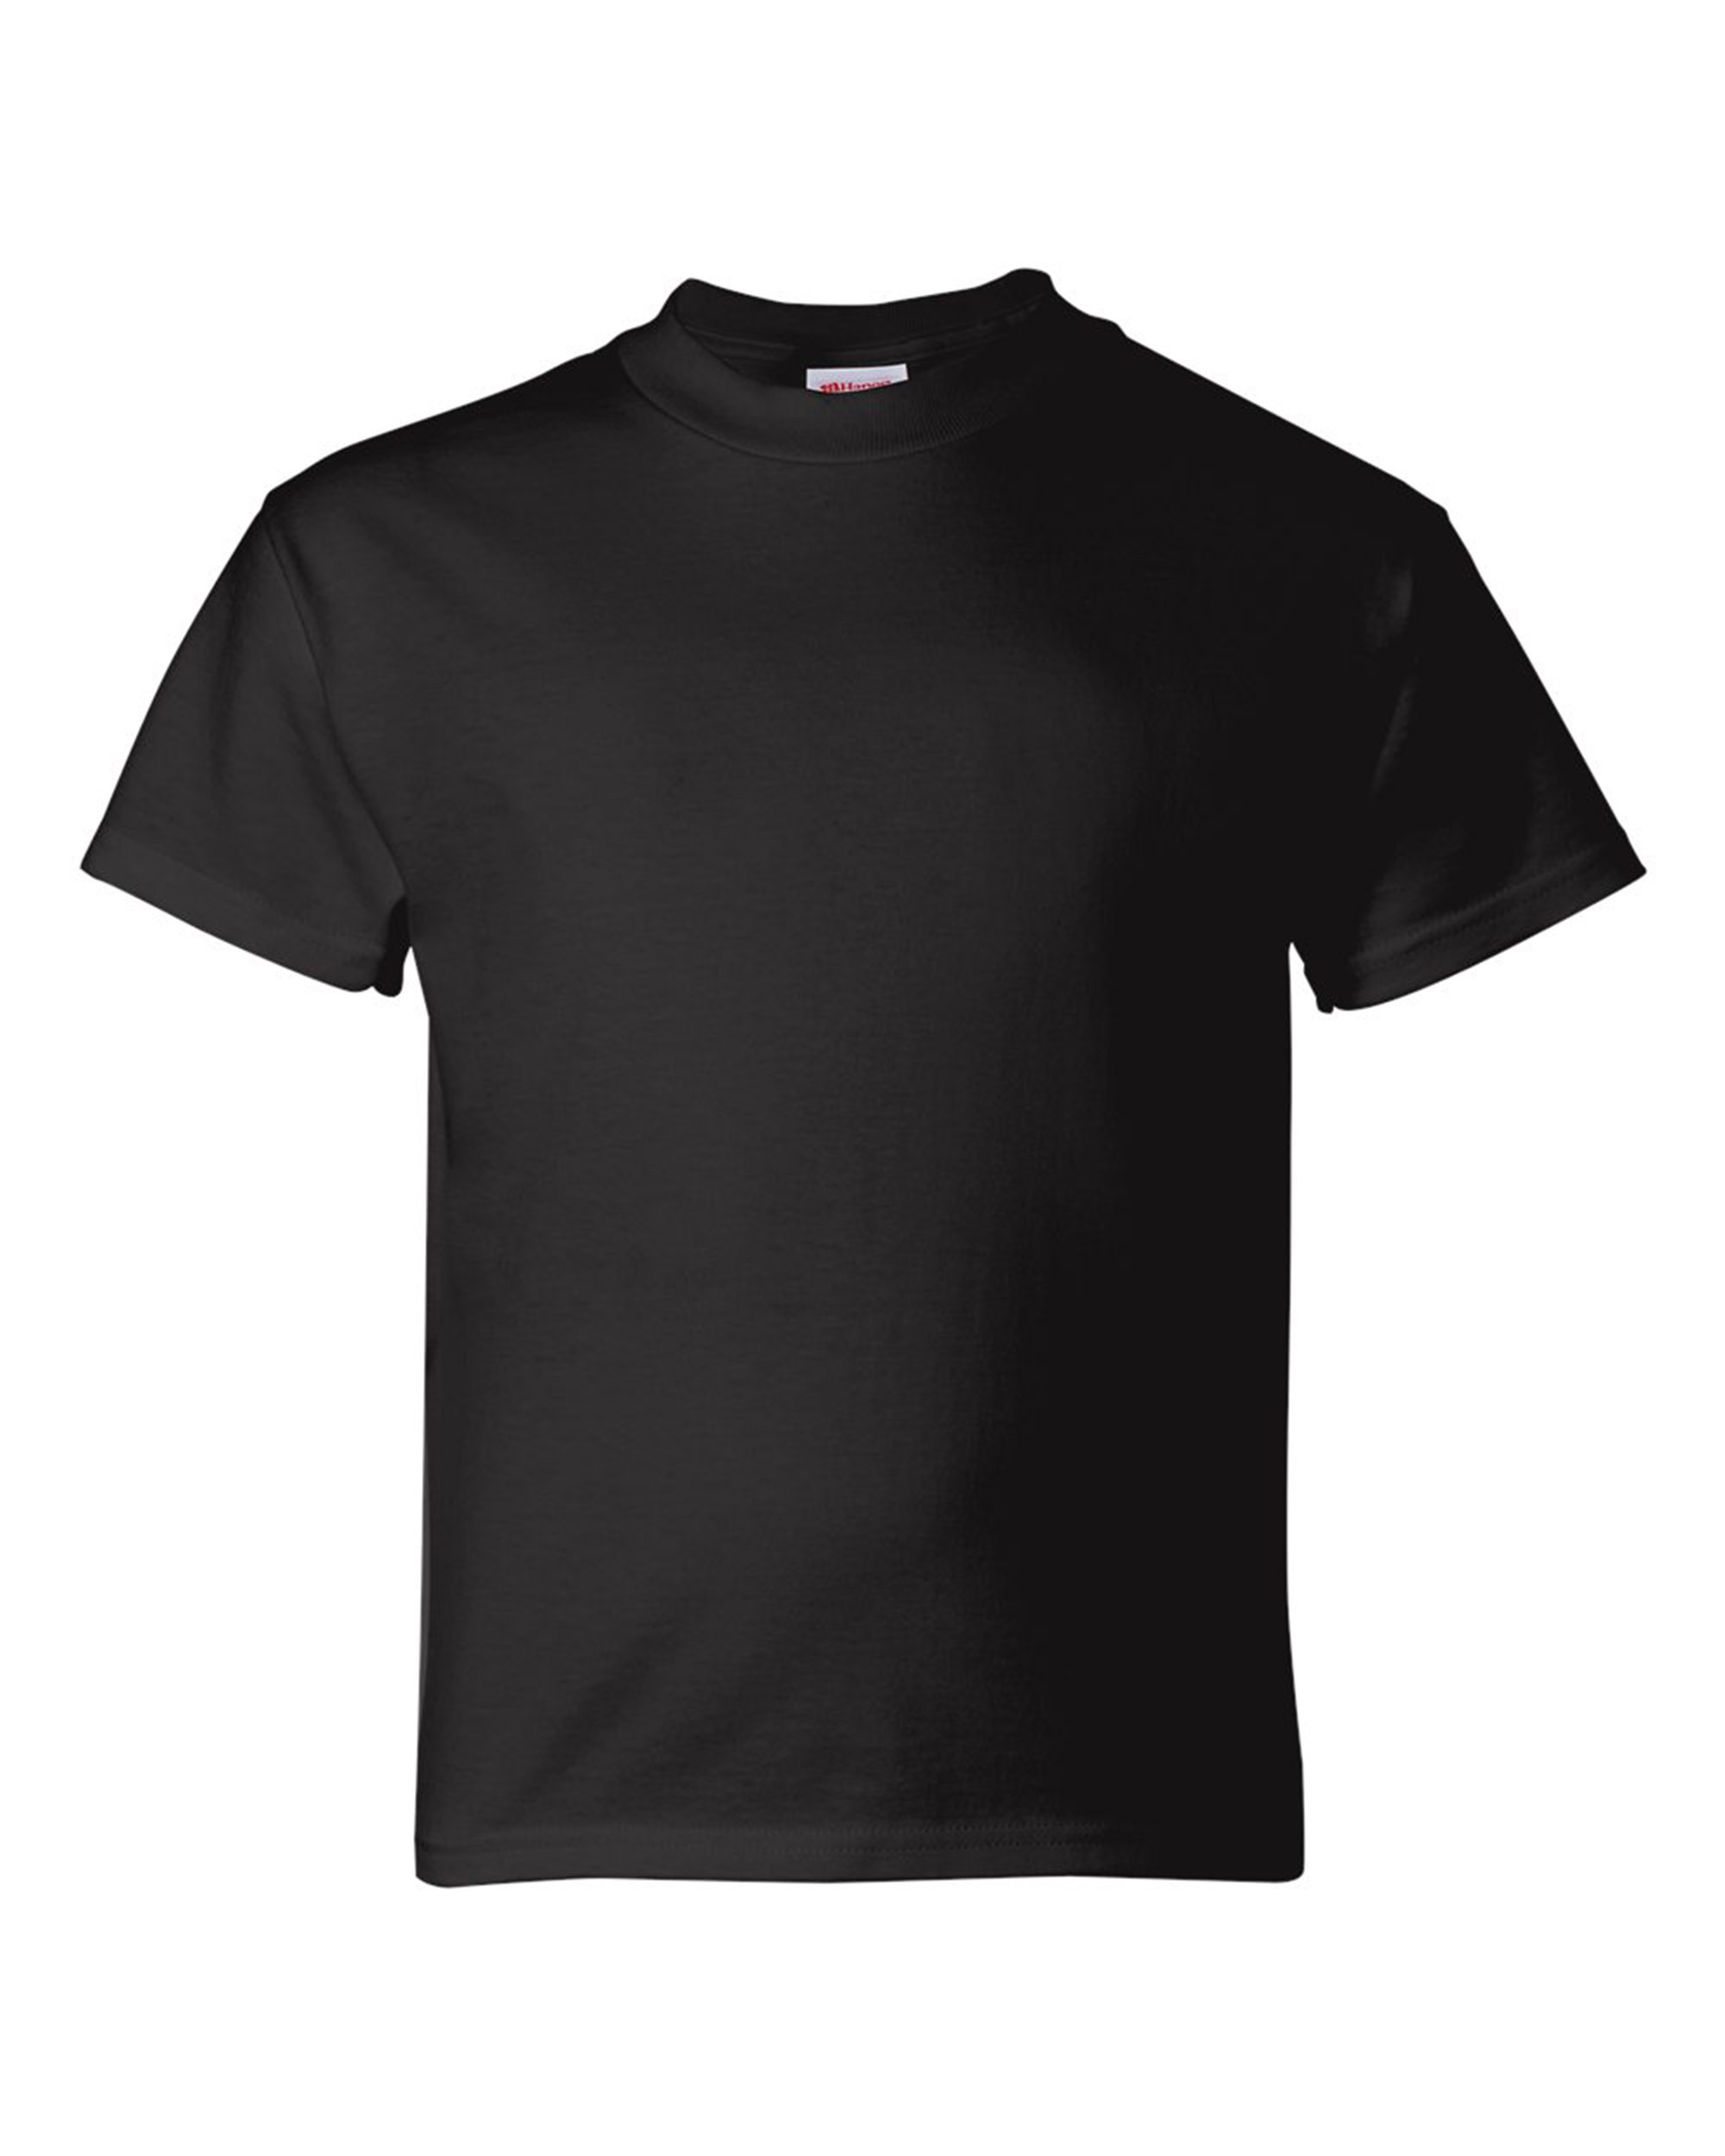 Hanes® 5480 Essential Youth Short Sleeve T-Shirt